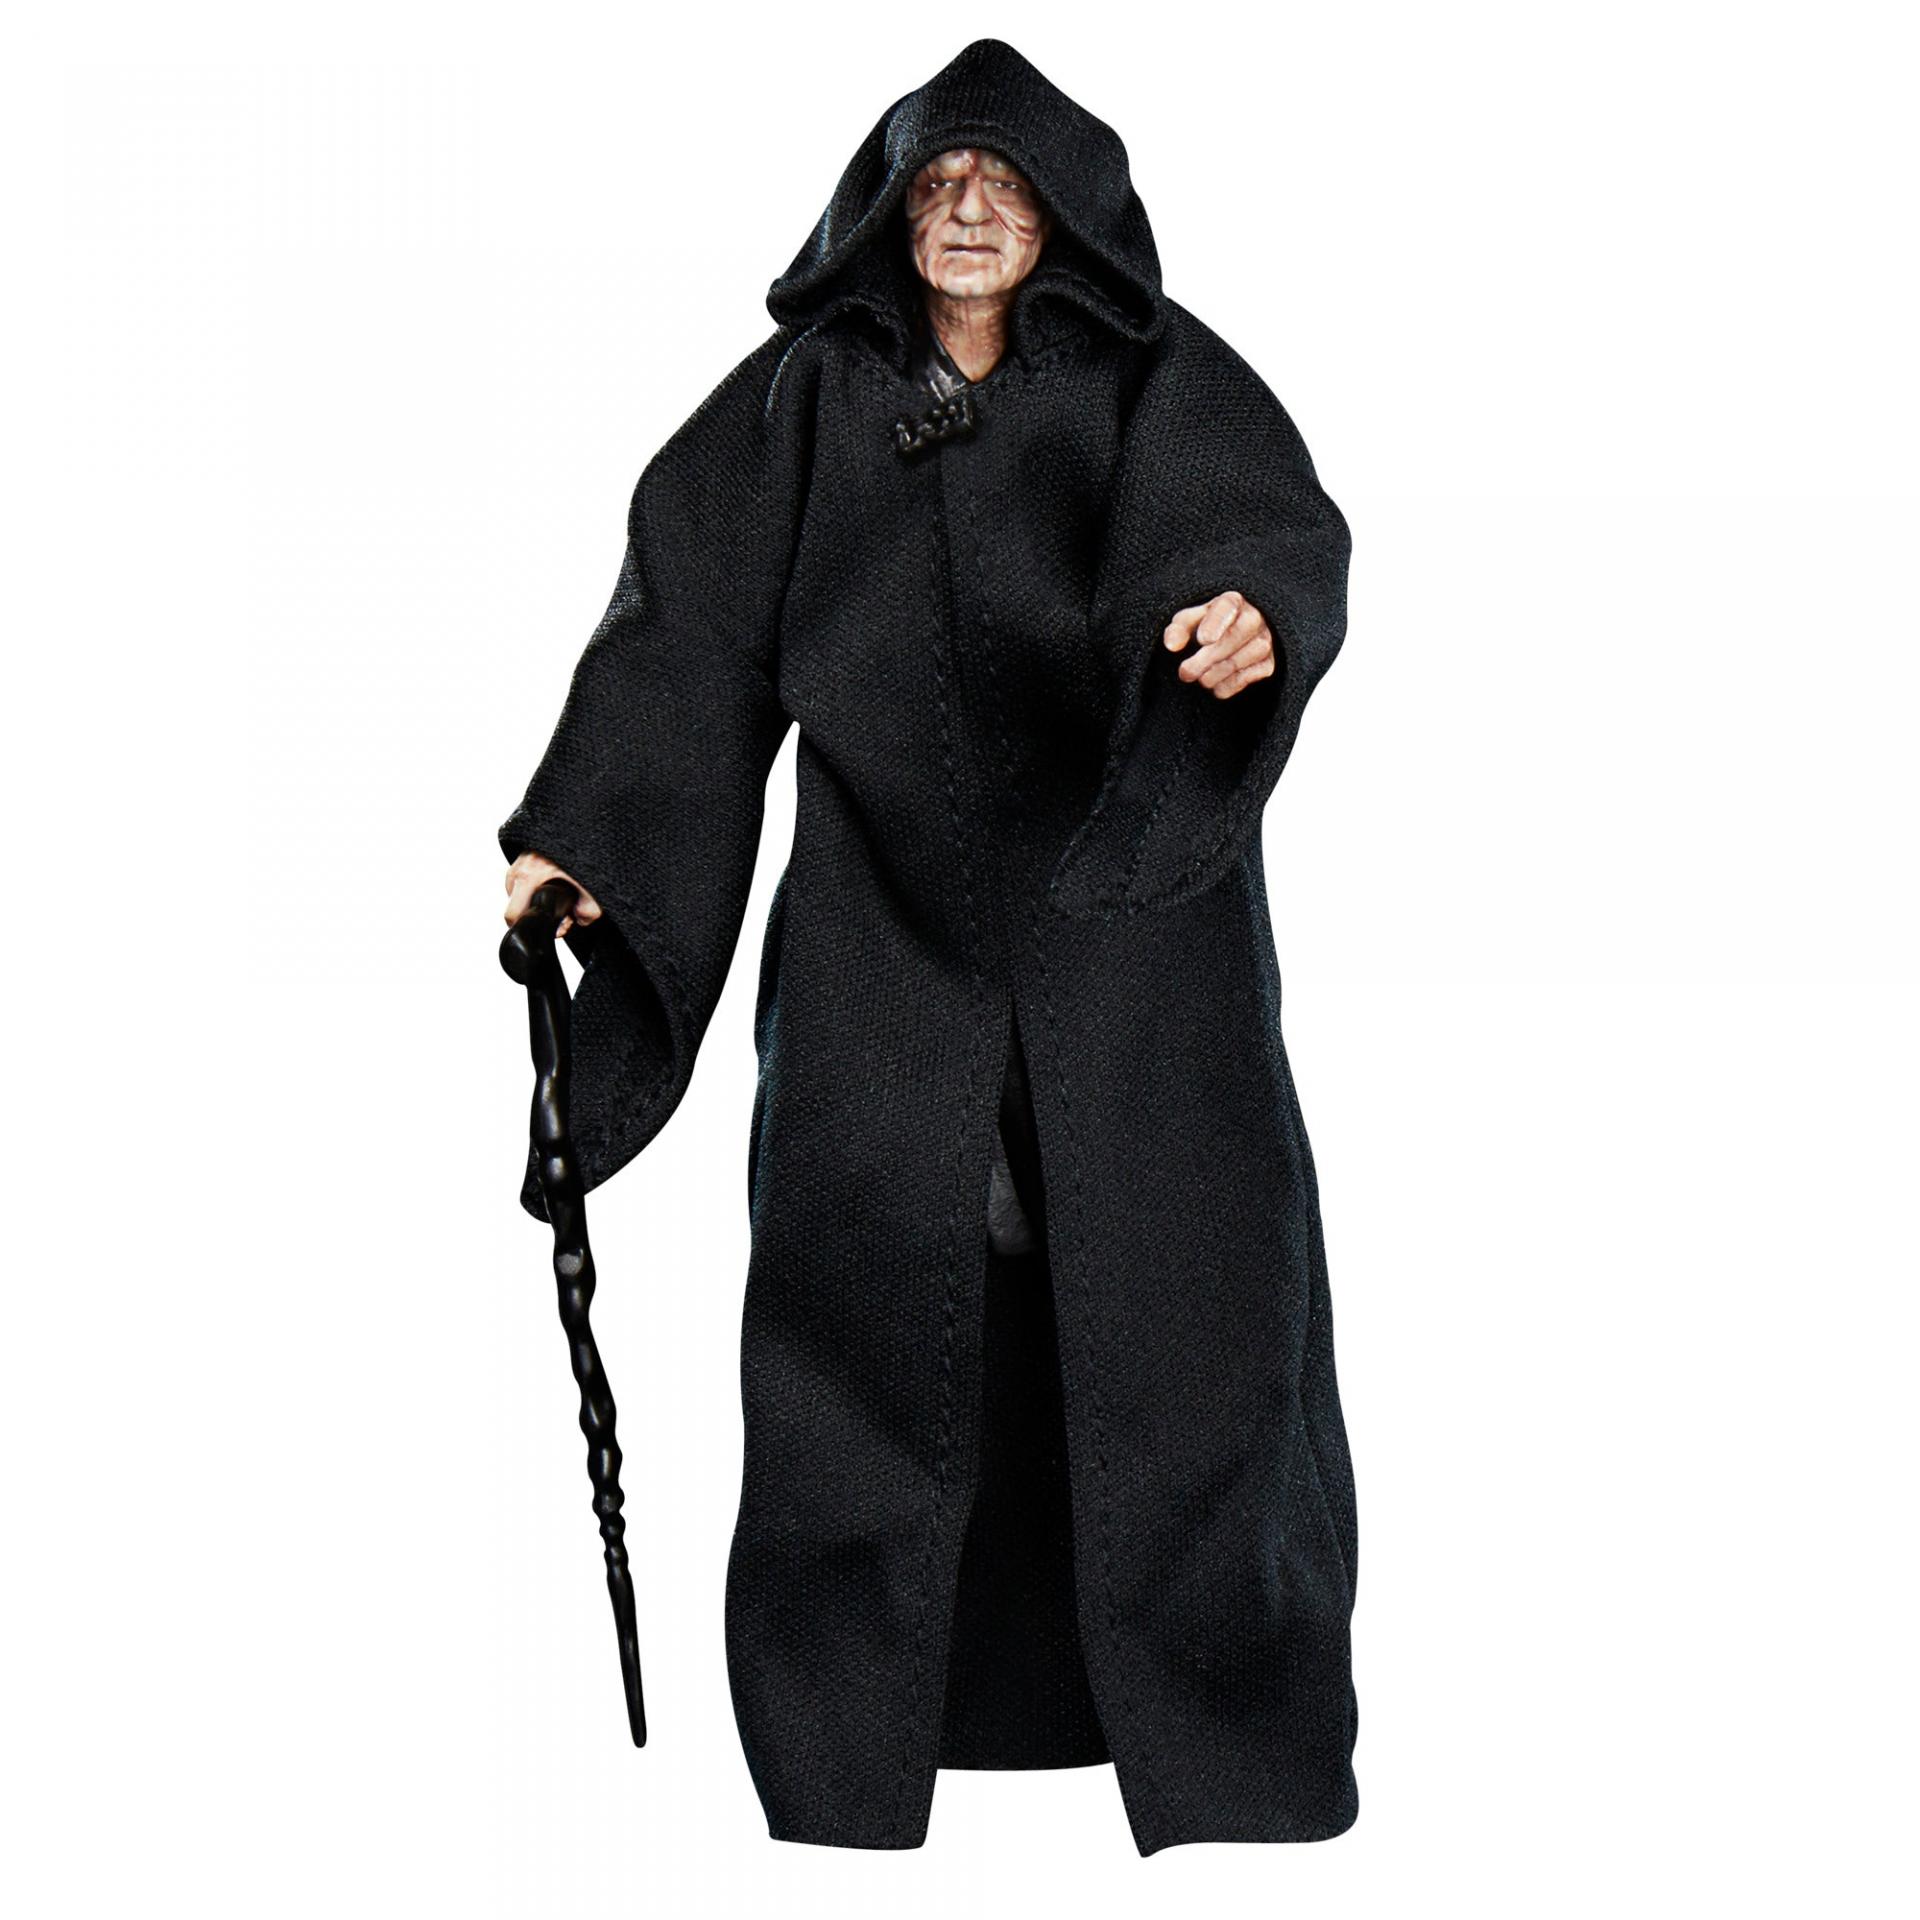 Star wars the black series archive emperor palpatine 15cm jawascave 7